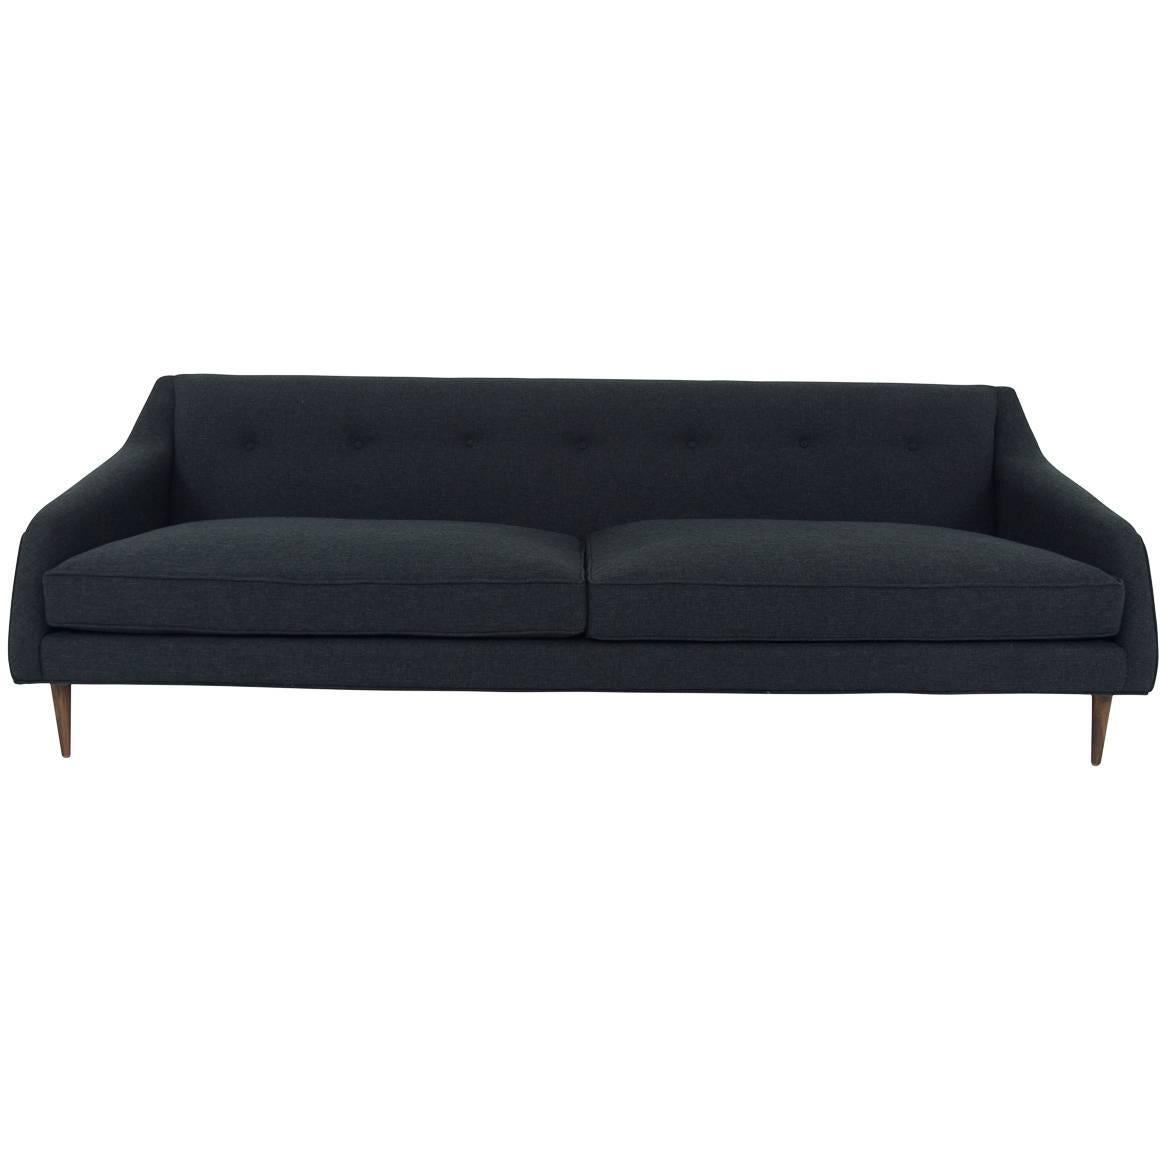 Mid-Century Style Palermo Sofa in Black Linen w/ Tufted Back & Coned Walnut Legs For Sale